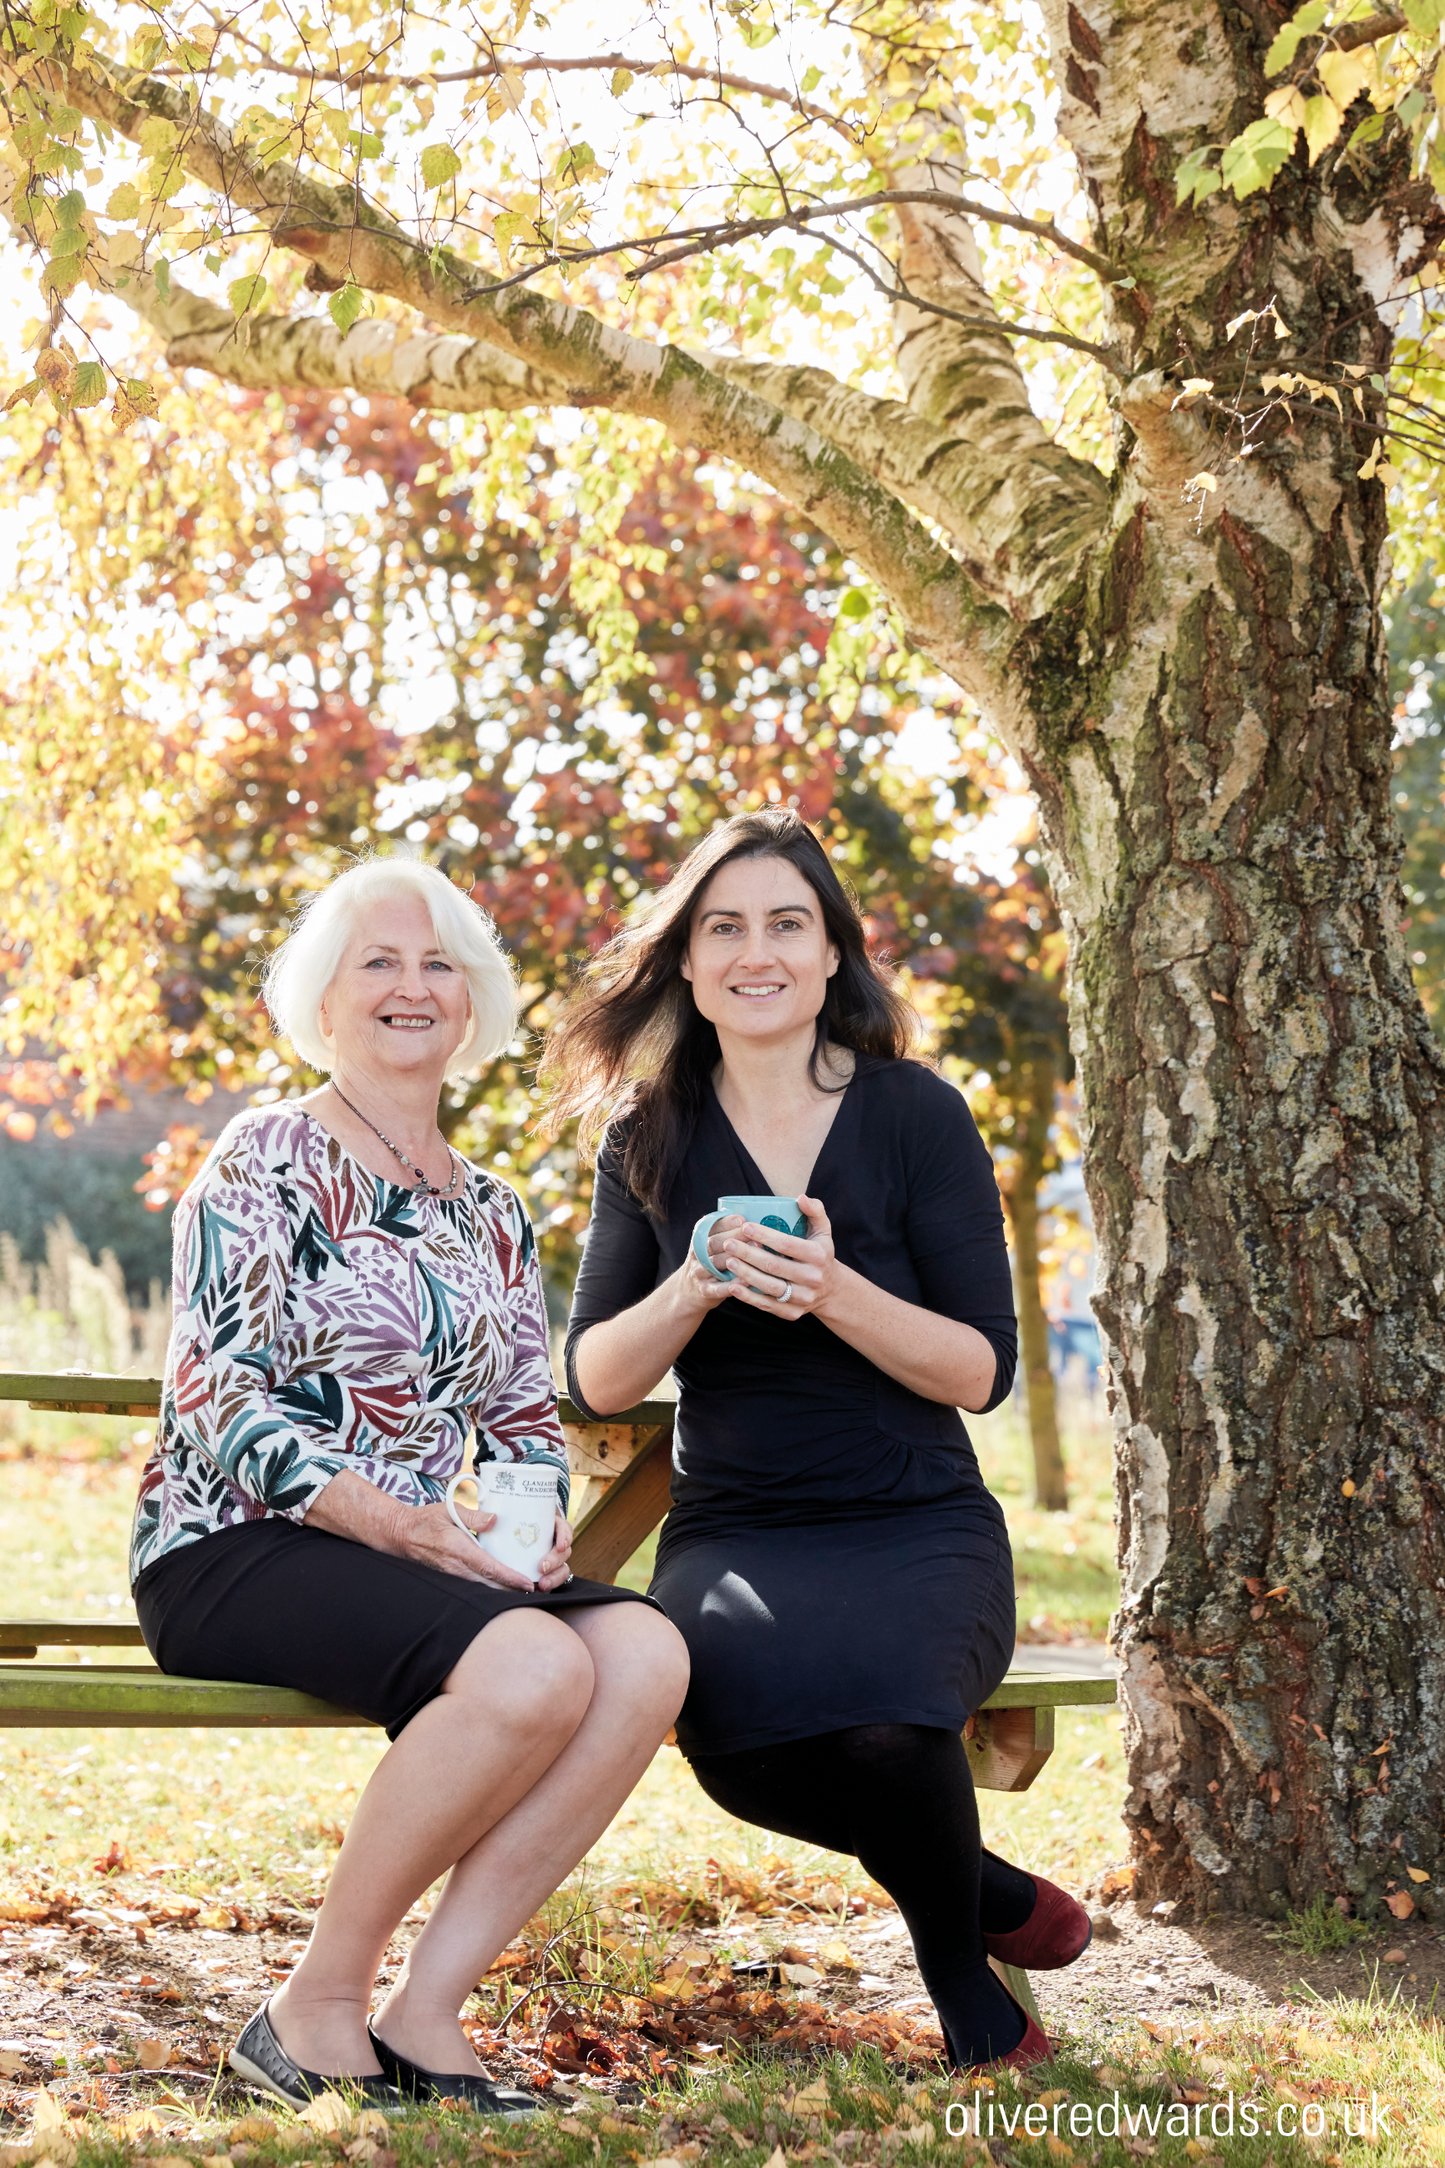 Odylique founder Margaret sitting on a bench with daughter Abbie under a tree.